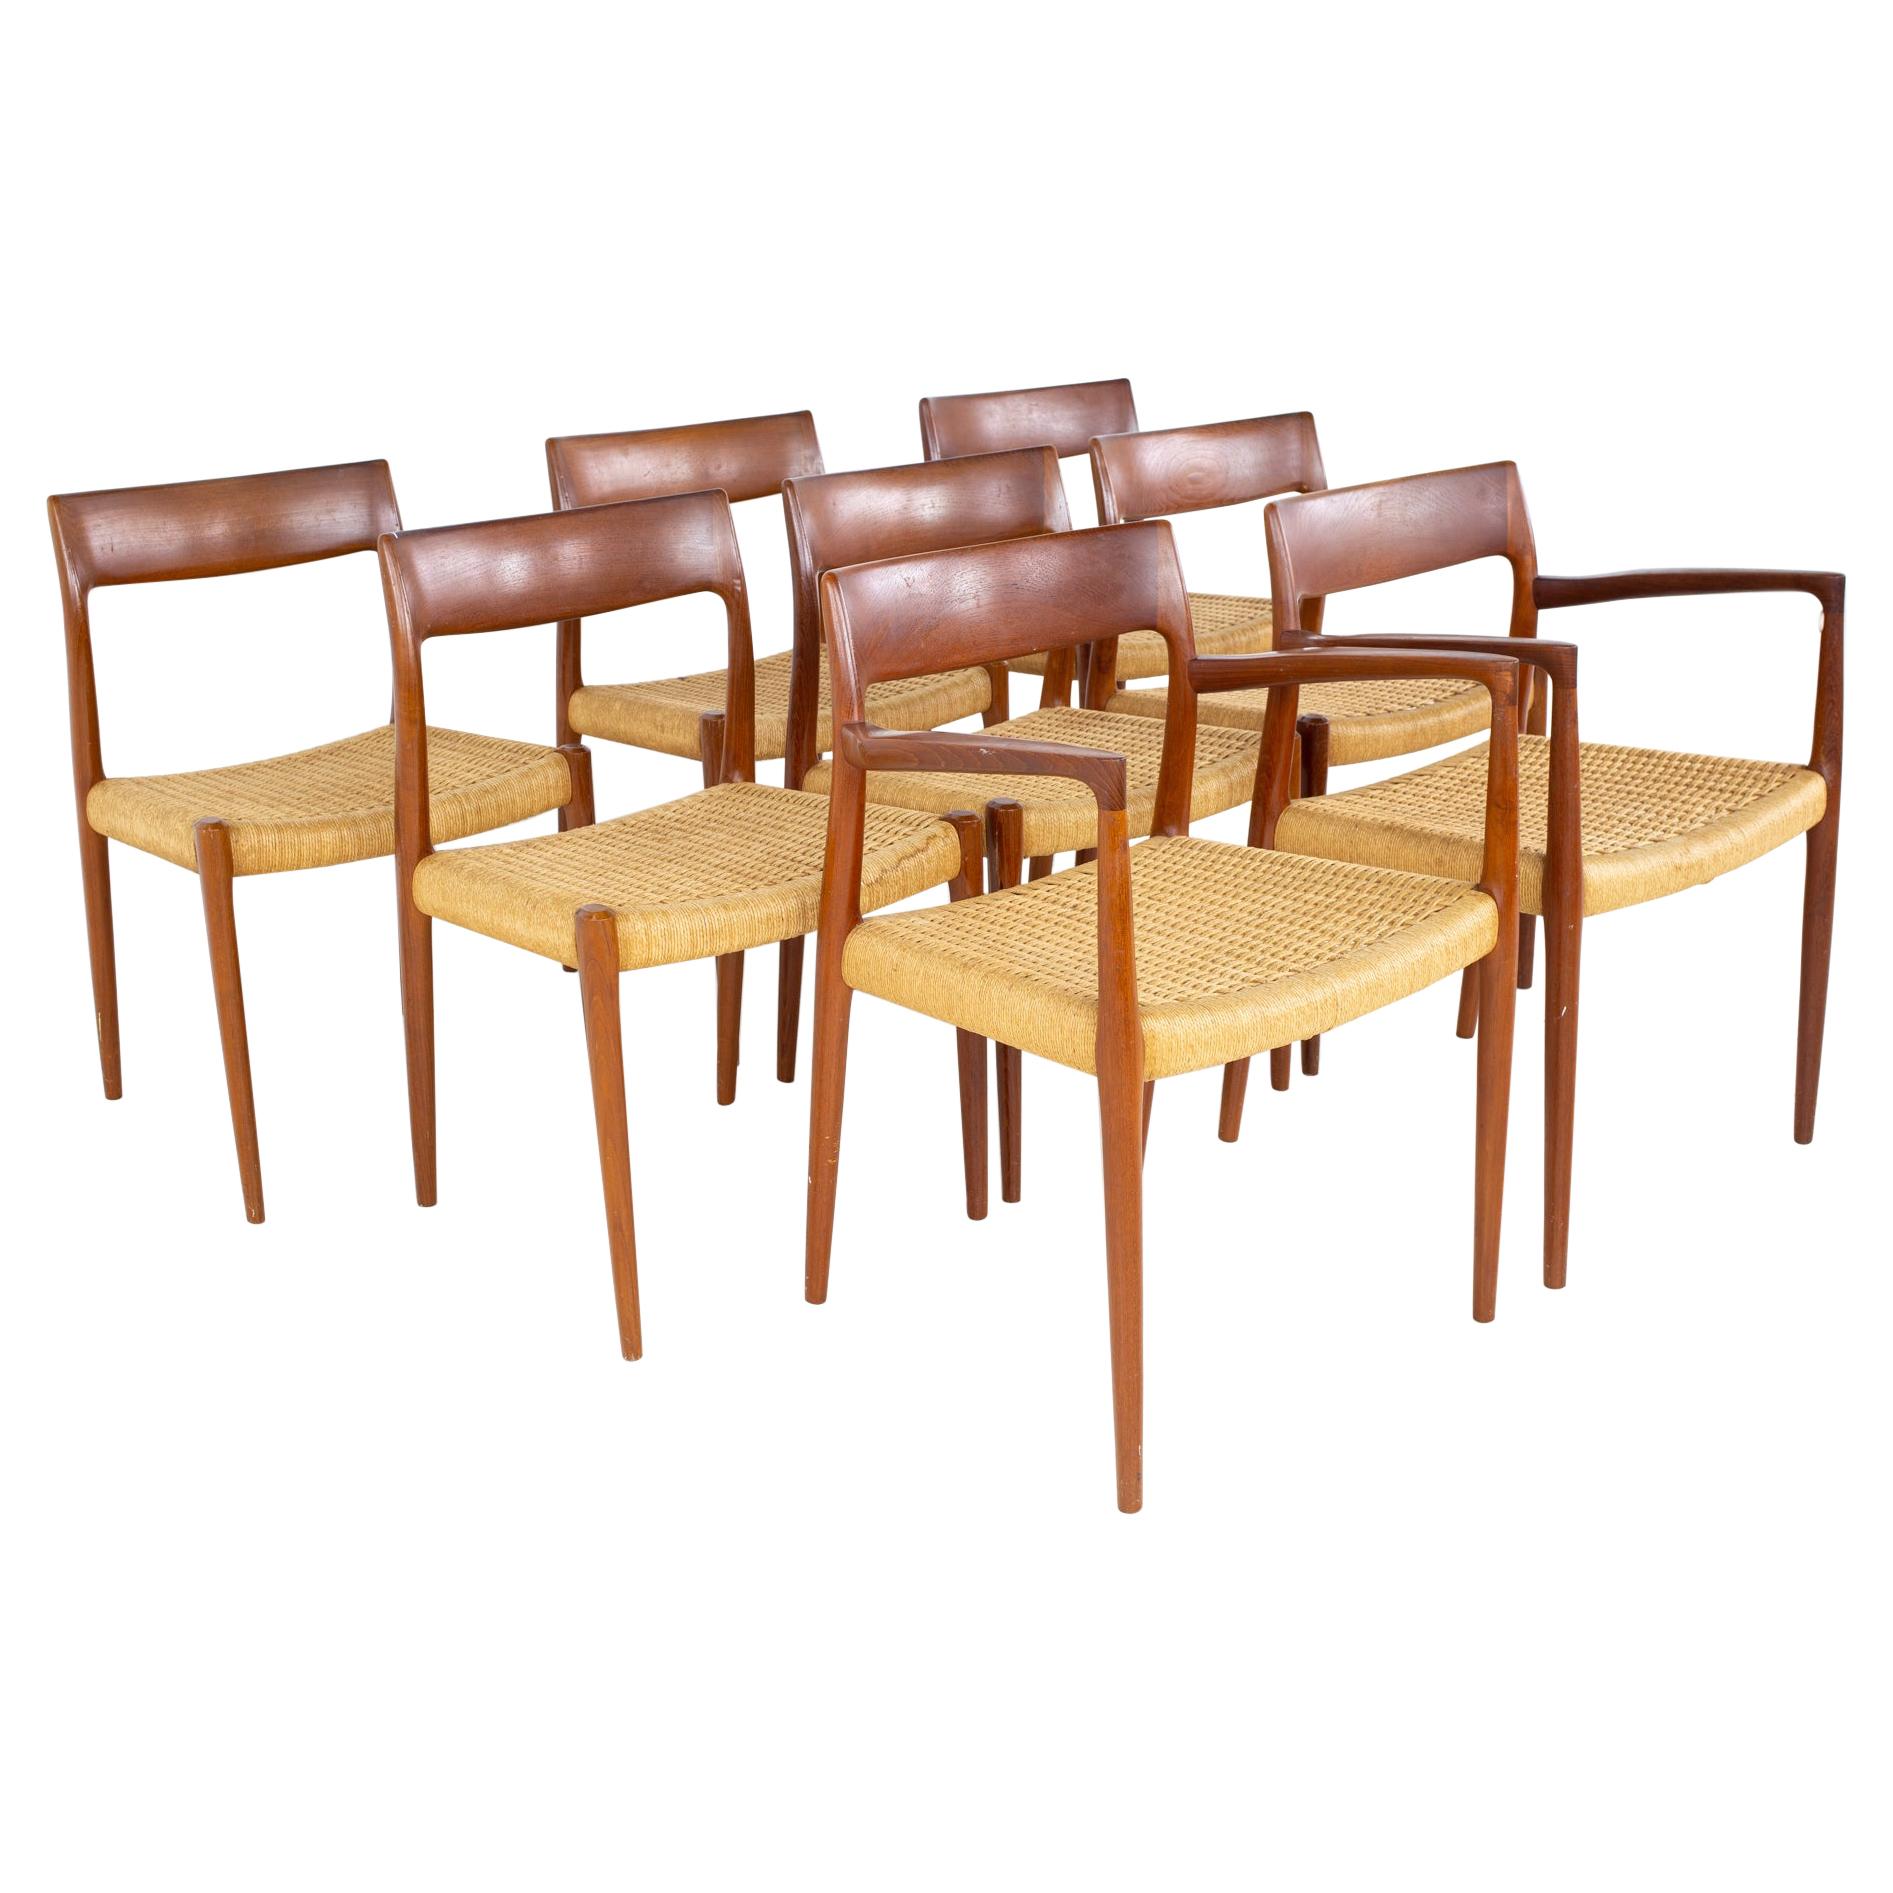 Niels Moller Model 77 Mid Century Teak Roped Dining Chairs, Set of 8